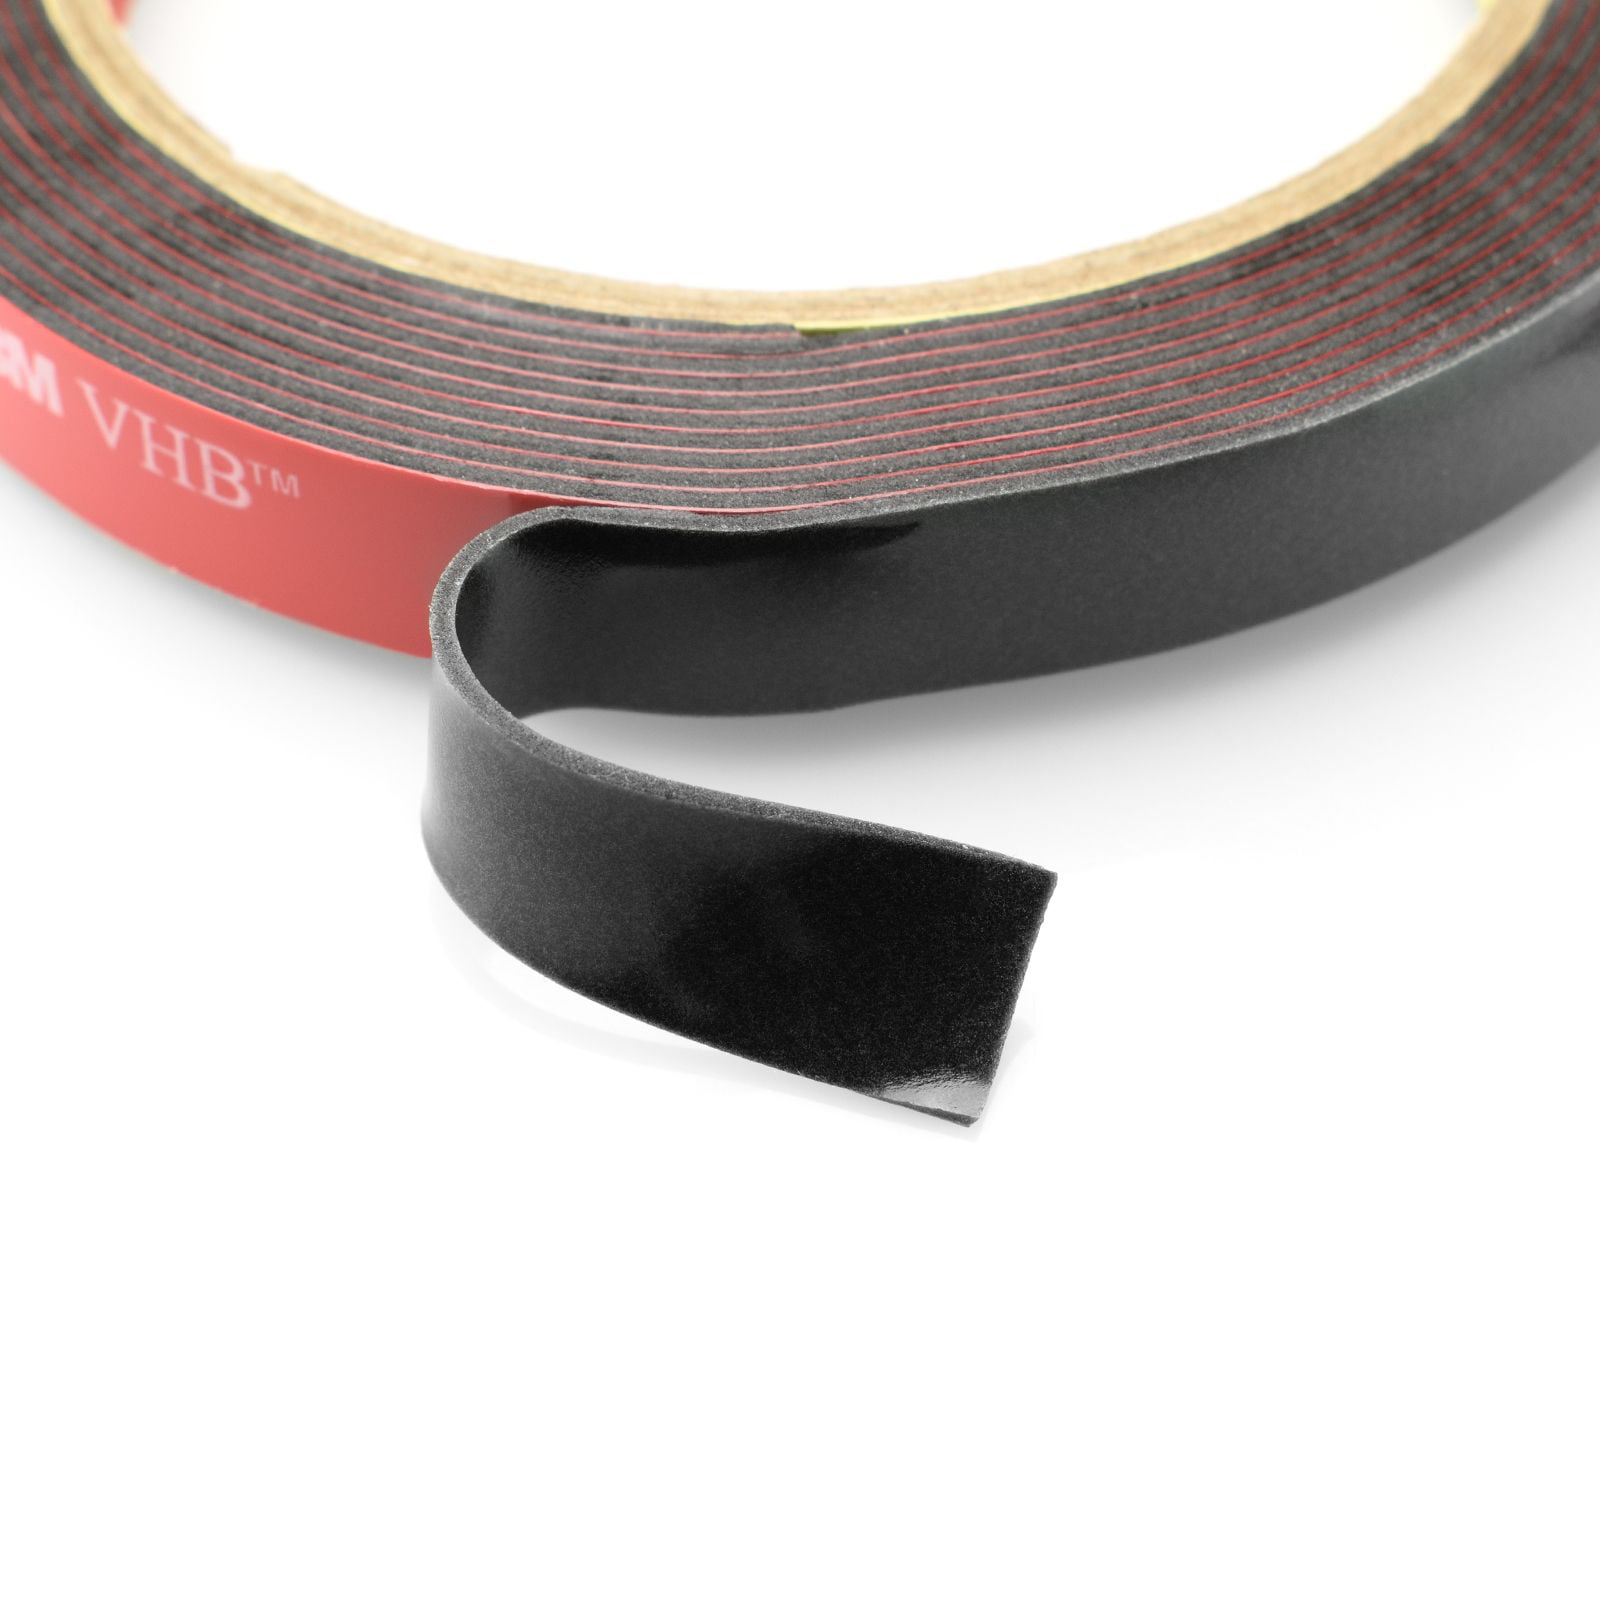 Genuine 2MM 3M VHB #5952 Double-Sided Mounting Tape 10.5M / 35FT / 420  Inches Length 